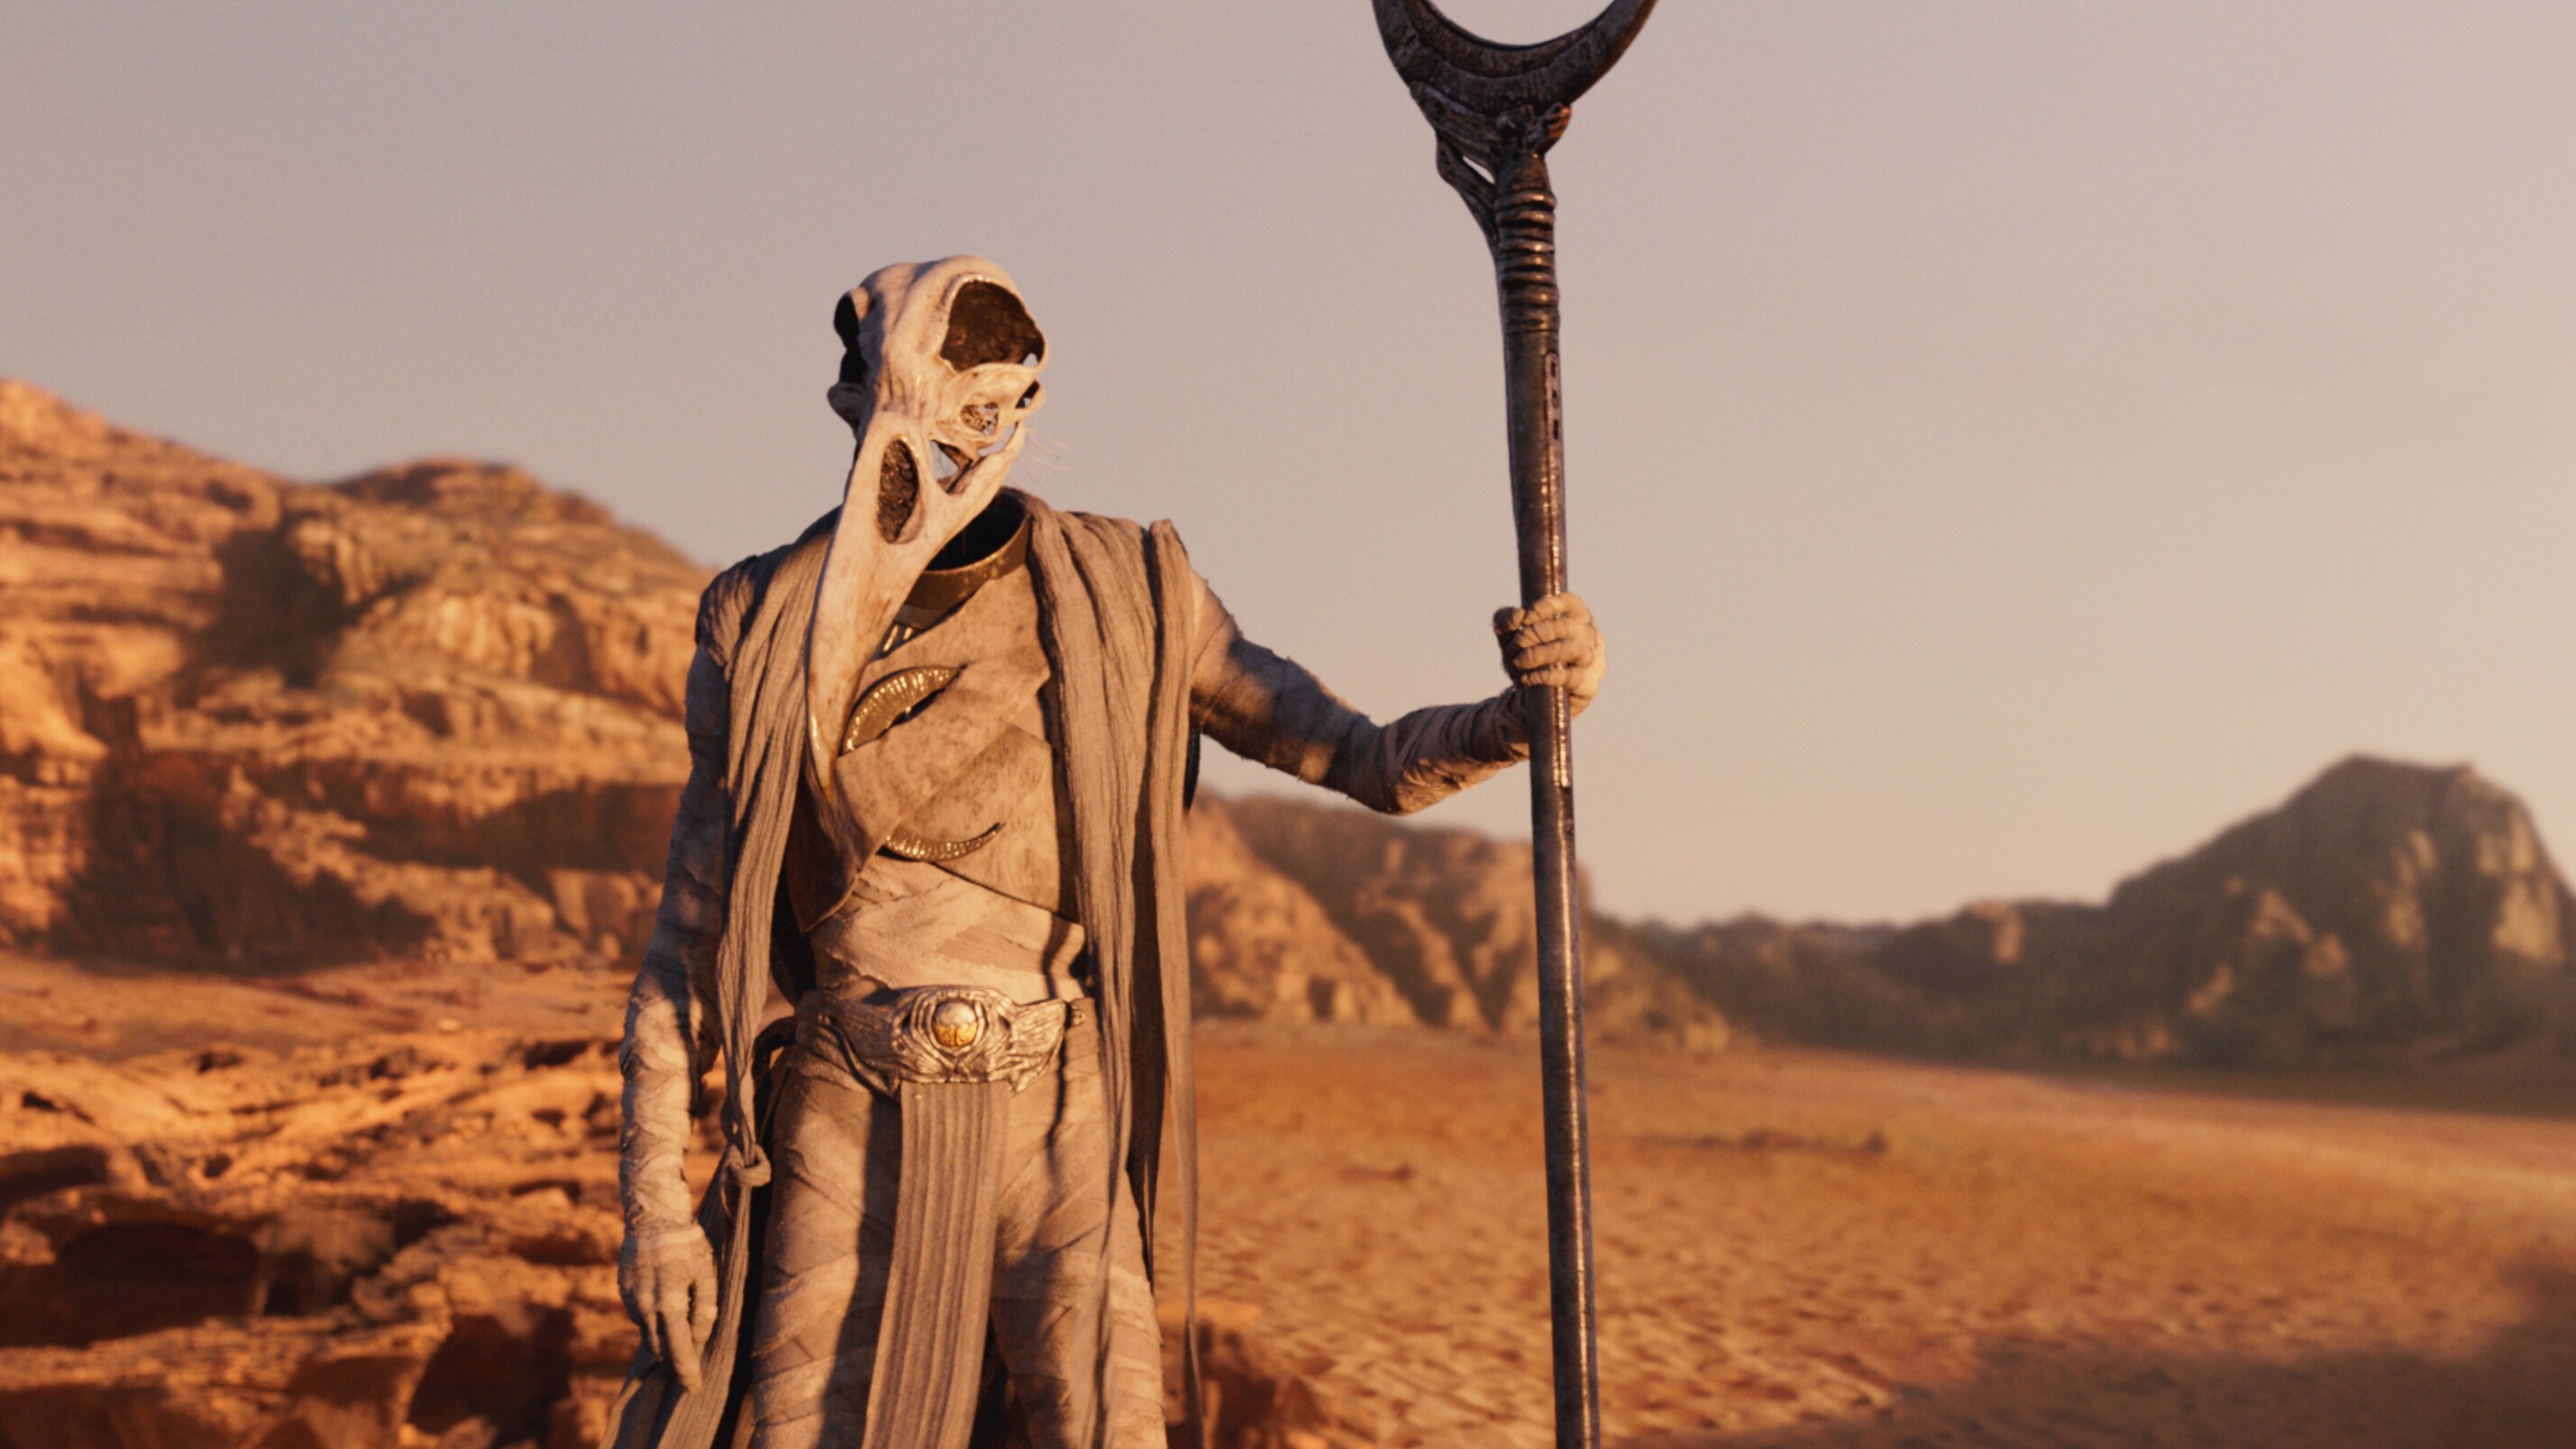 Khonshu (voiced by F. Murray Abraham) in Marvel Studios' MOON KNIGHT, exclusively on Disney+. Photo courtesy of Marvel Studios. ©Marvel Studios 2022. All Rights Reserved.